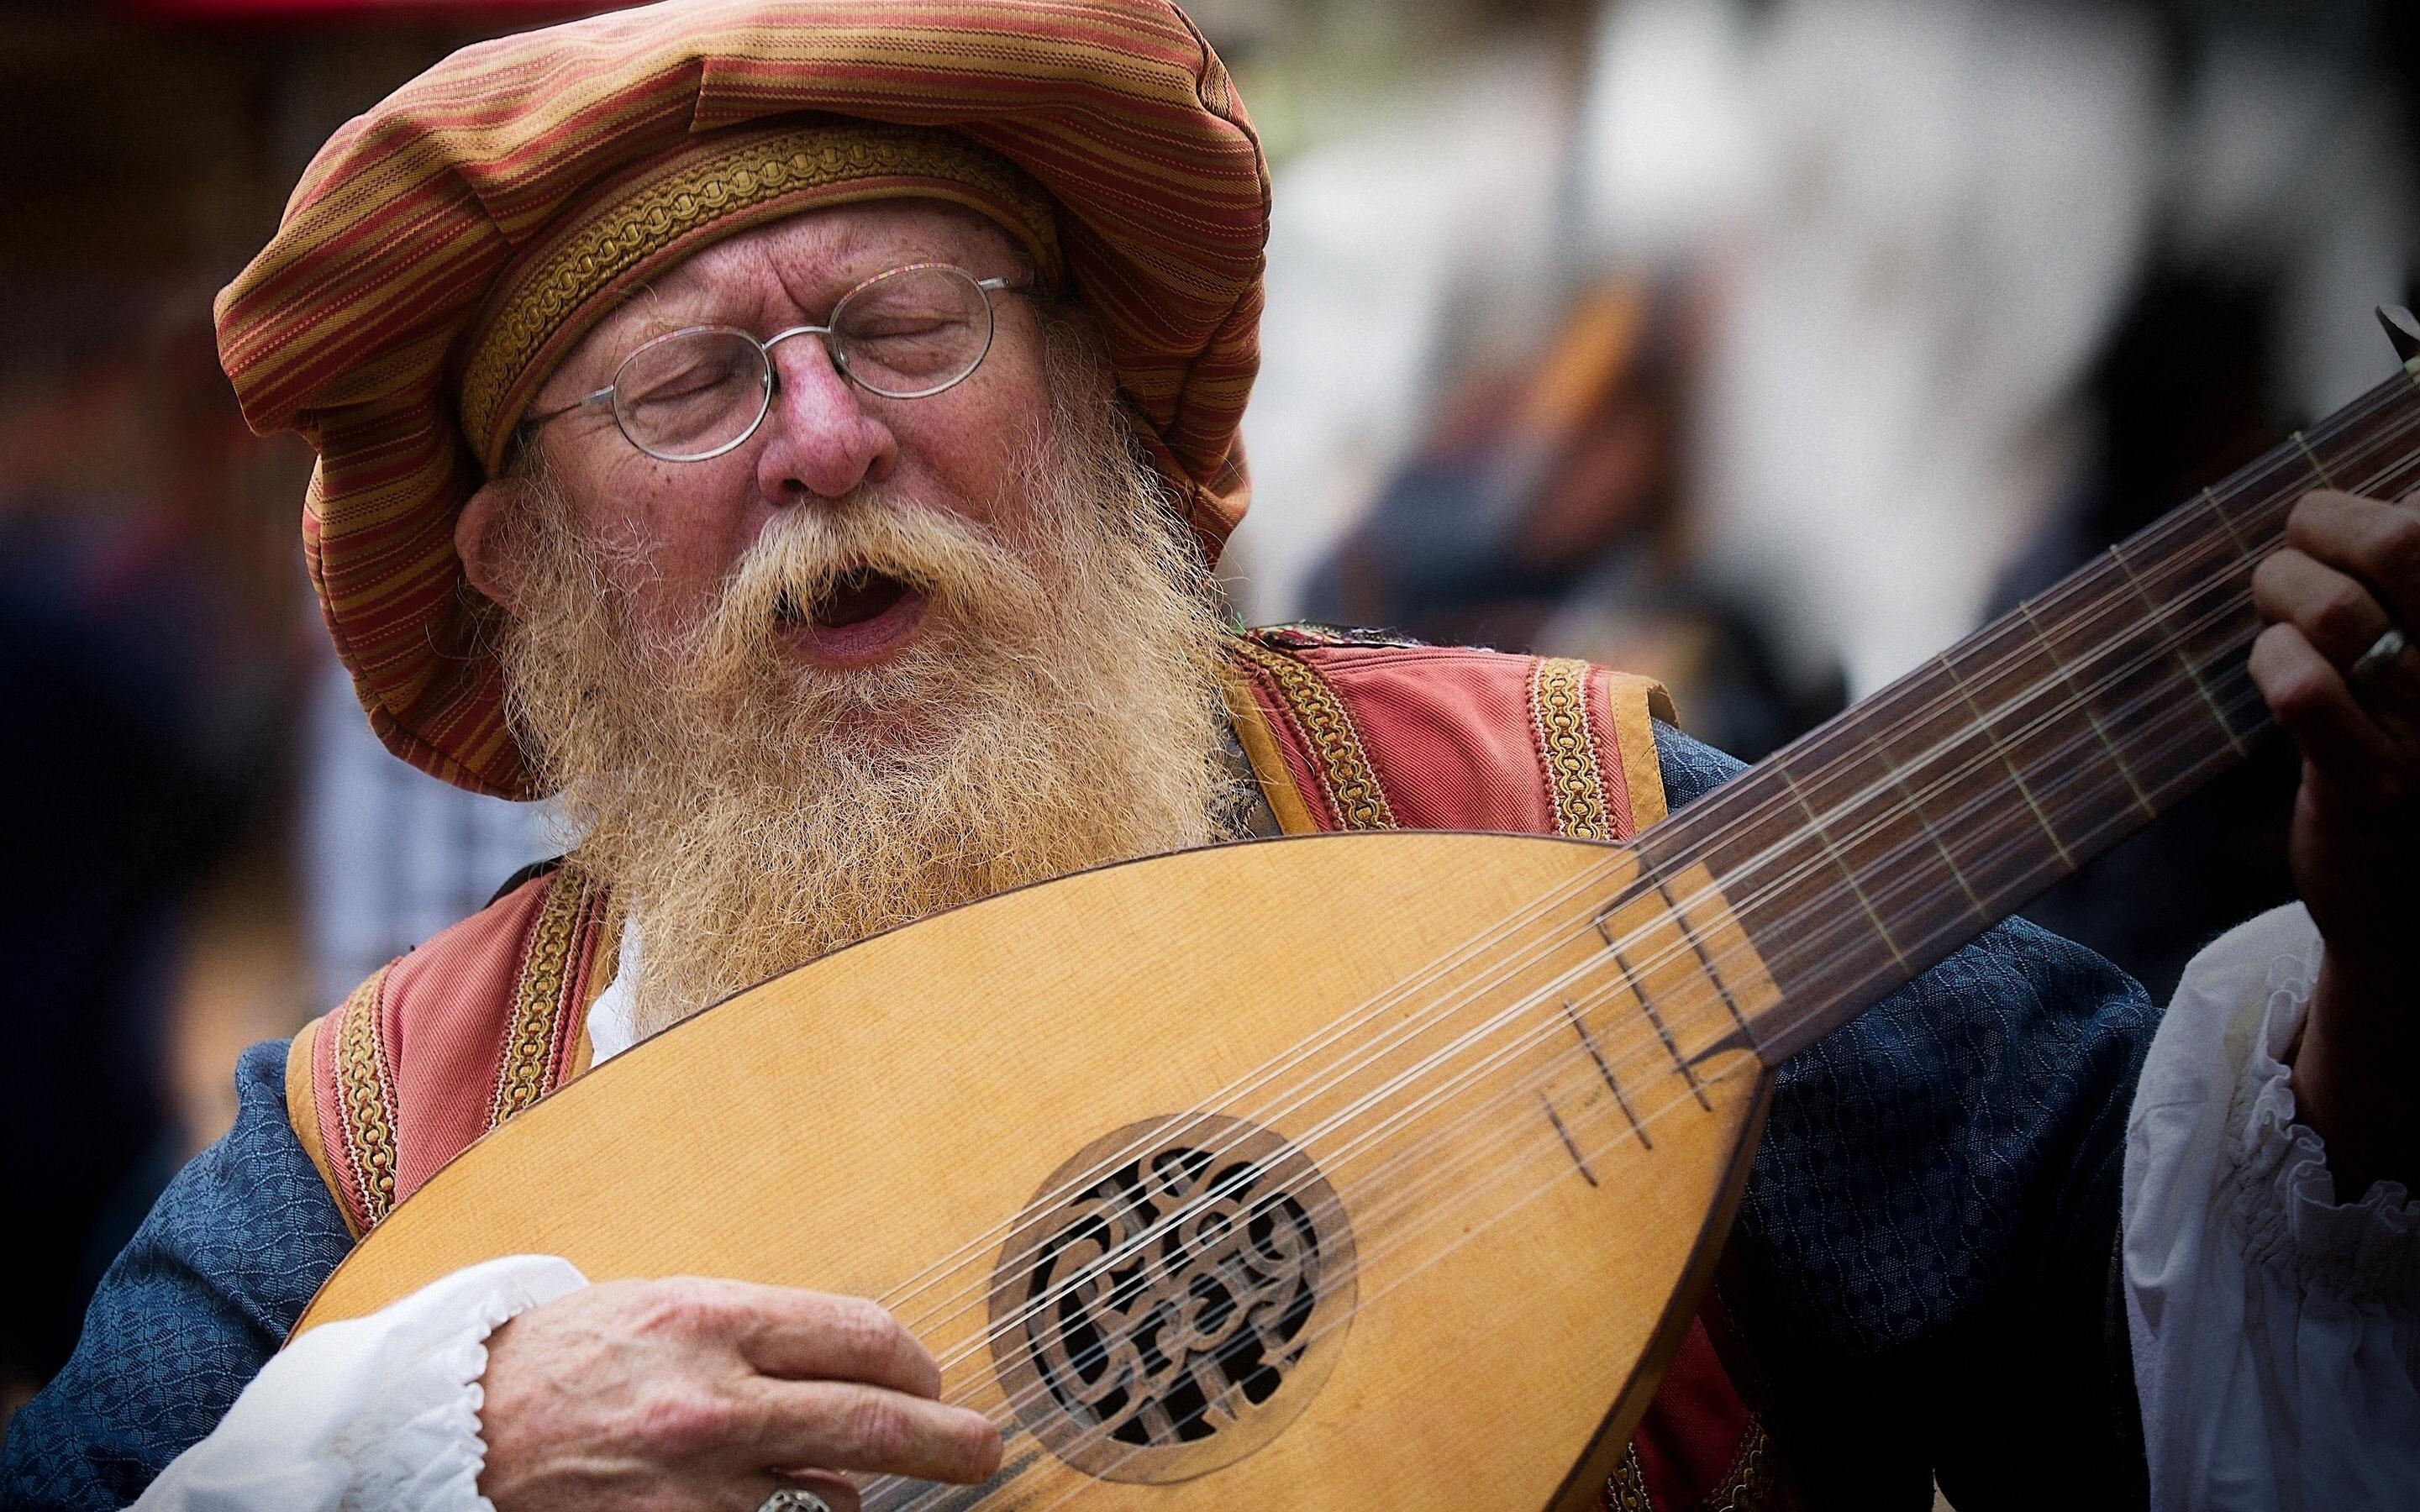 Lute: Roleplaying Event, Medieval Bards Competition, Costumed Music Festival, Lute Guitar. 2880x1800 HD Wallpaper.